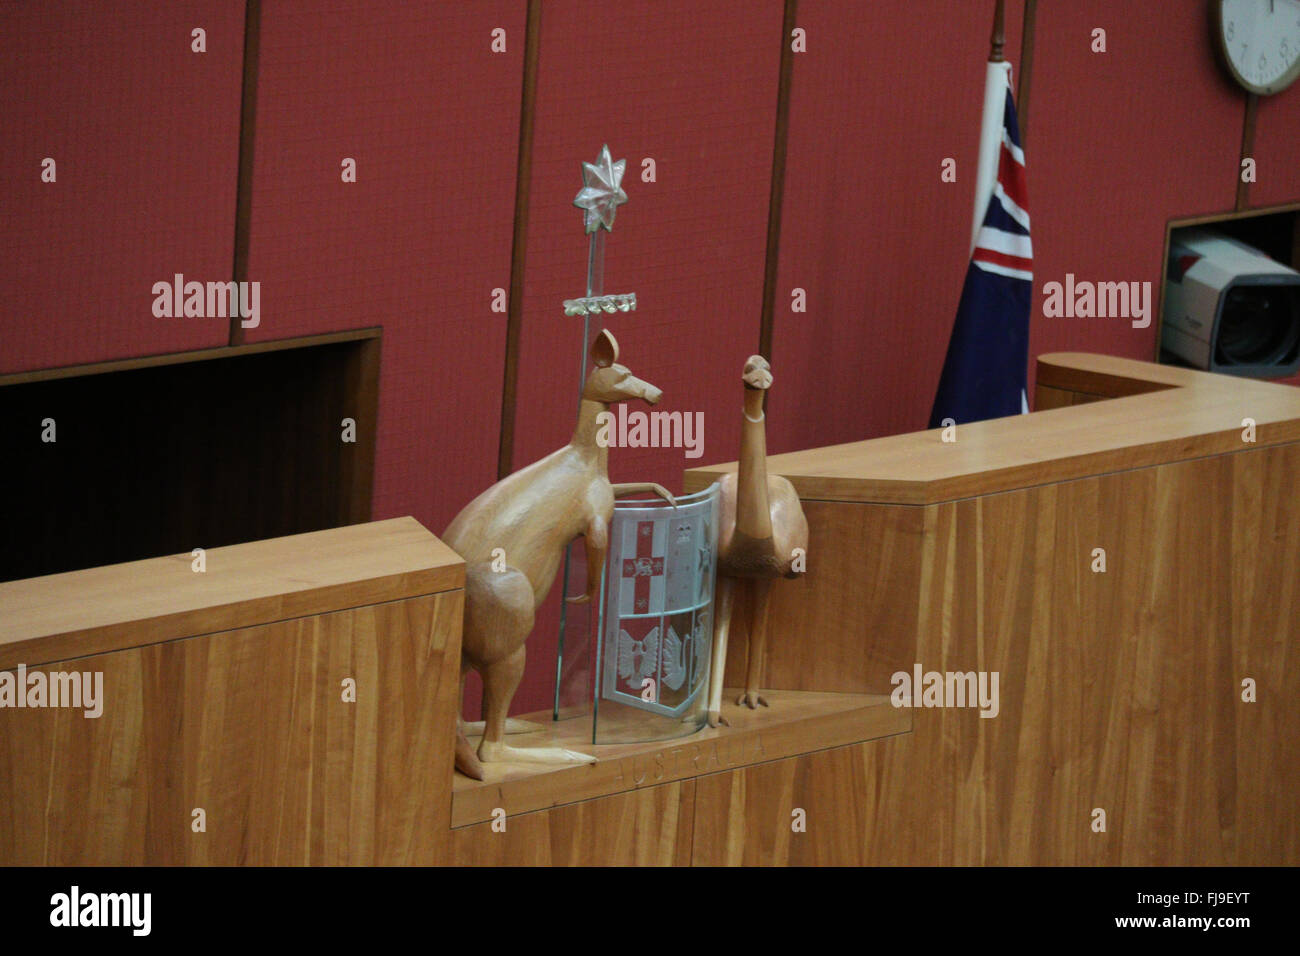 The Senate at Australian Parliament House at Capital Hill in Canberra. Stock Photo